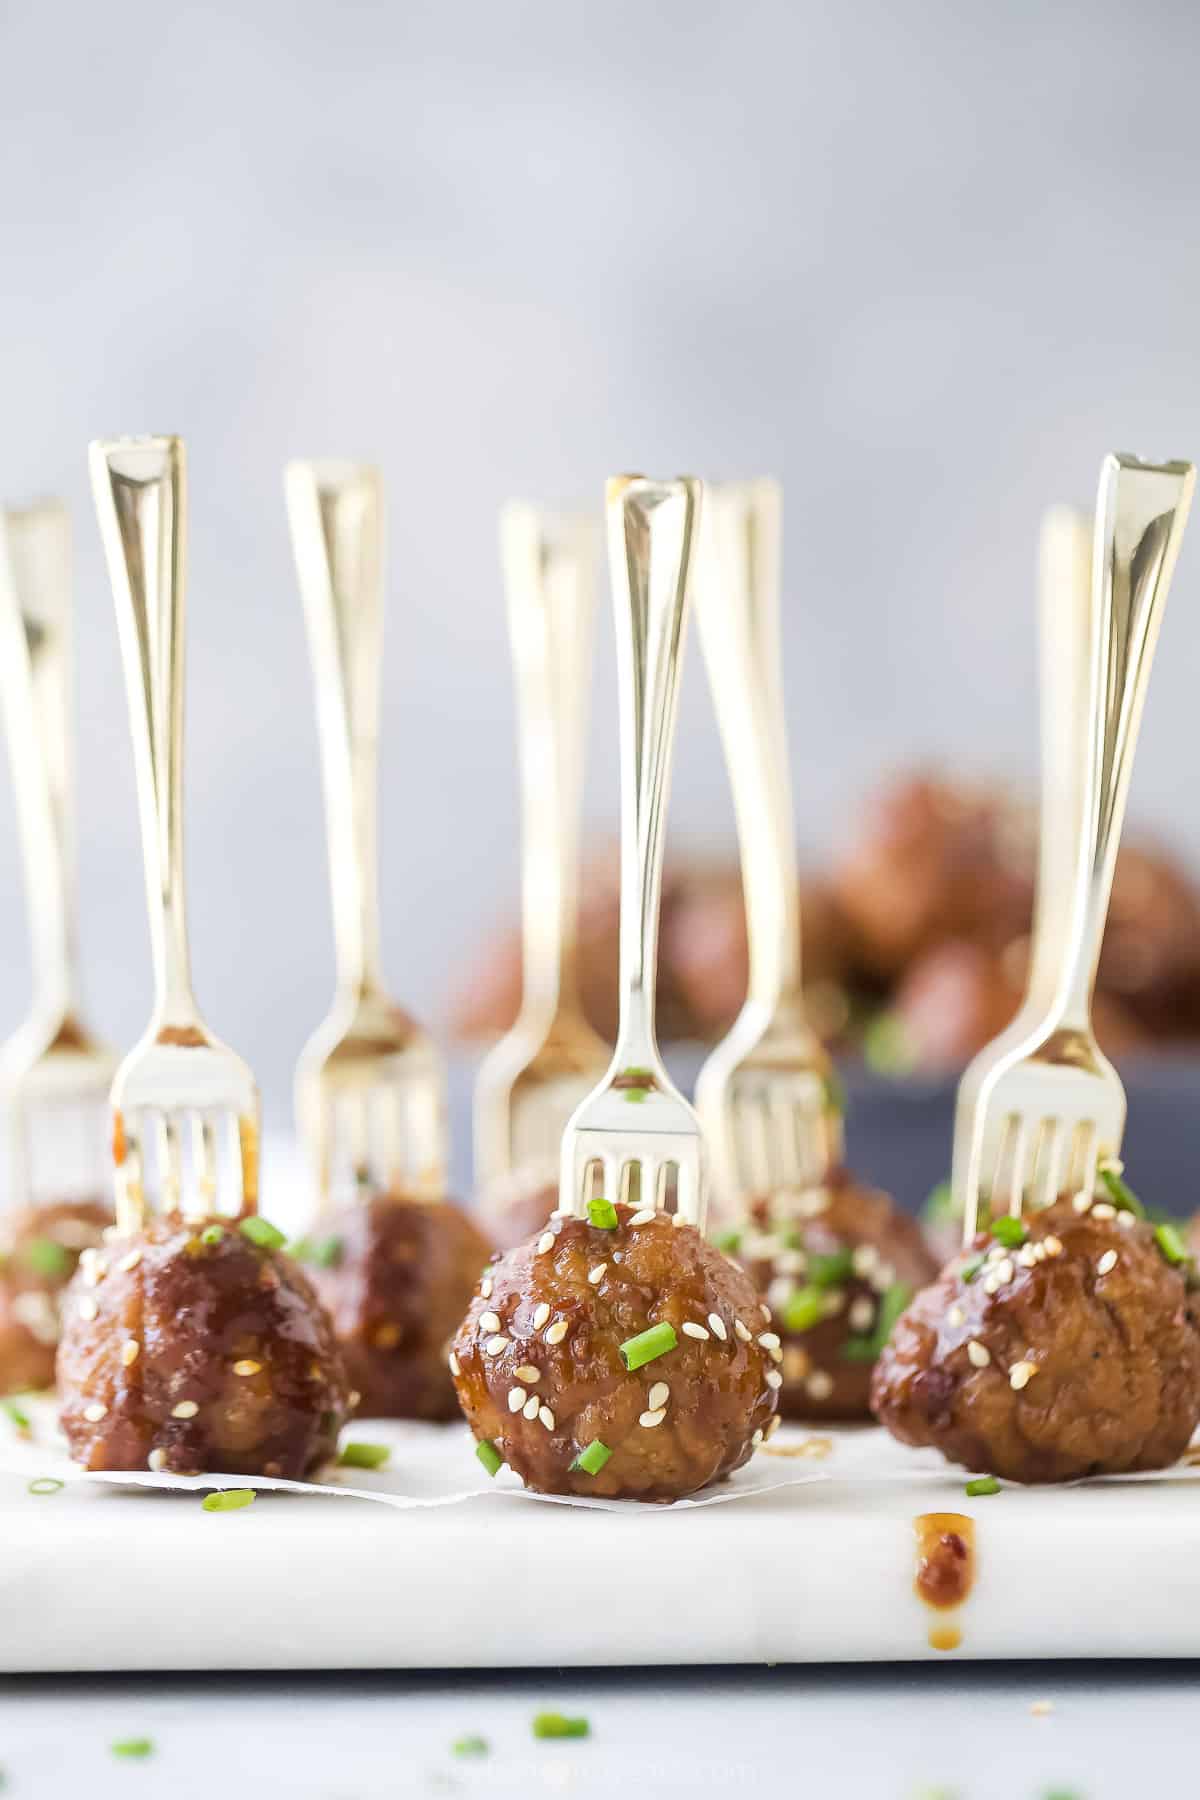 A white cutting board holding Crockpot Asian meatballs with forks jabbed into them